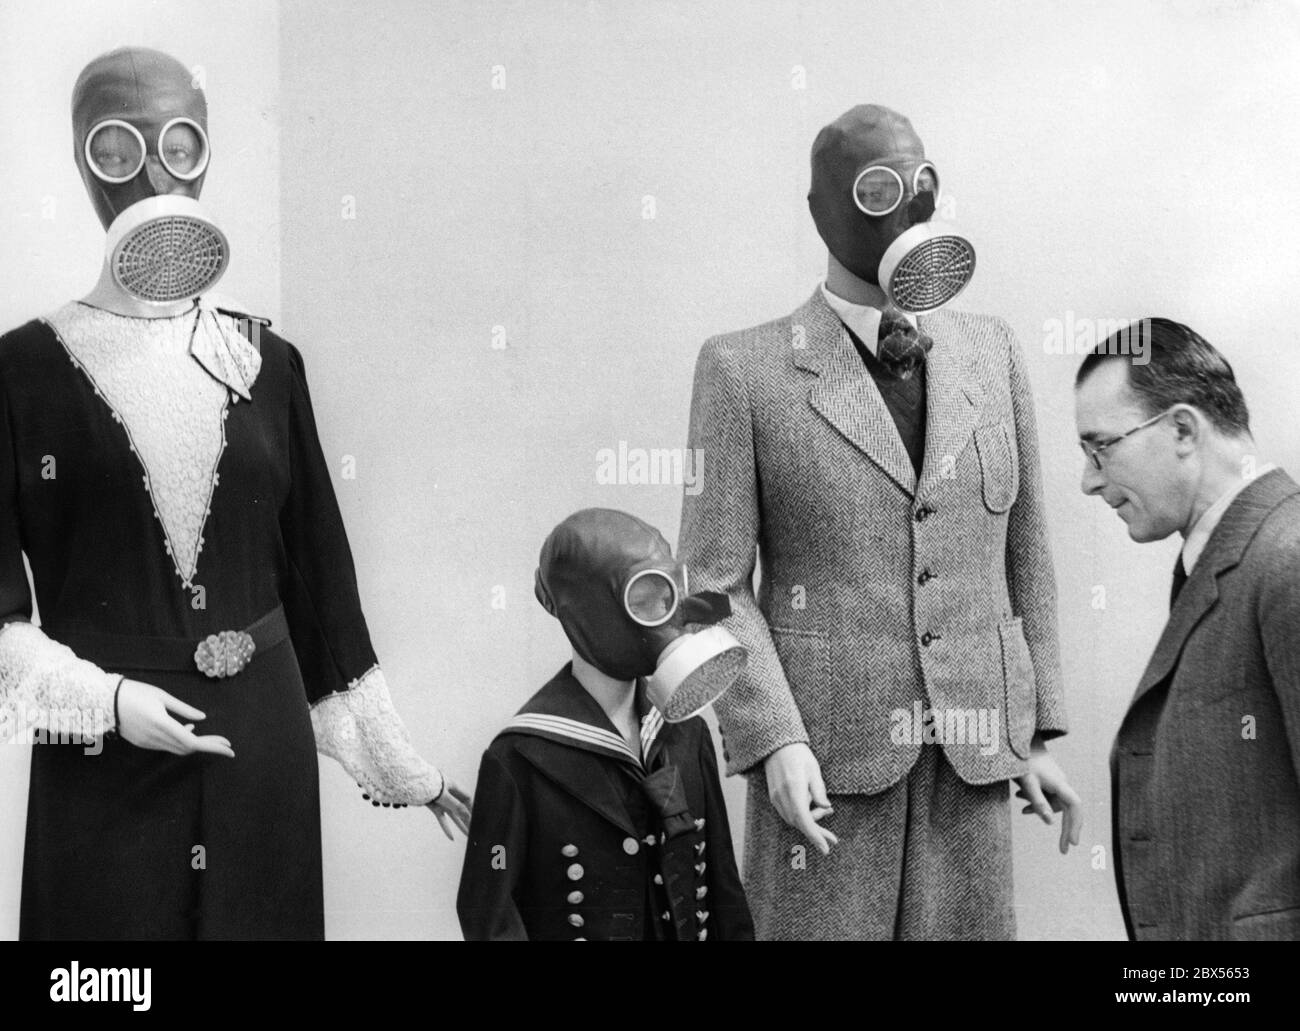 At the exhibition 'Gesundes Leben - Frohes Schaffen' ( Healthy Life - Glad Work) in Berlin in 1938,  an average German family is displayed wearing breathing masks. Stock Photo